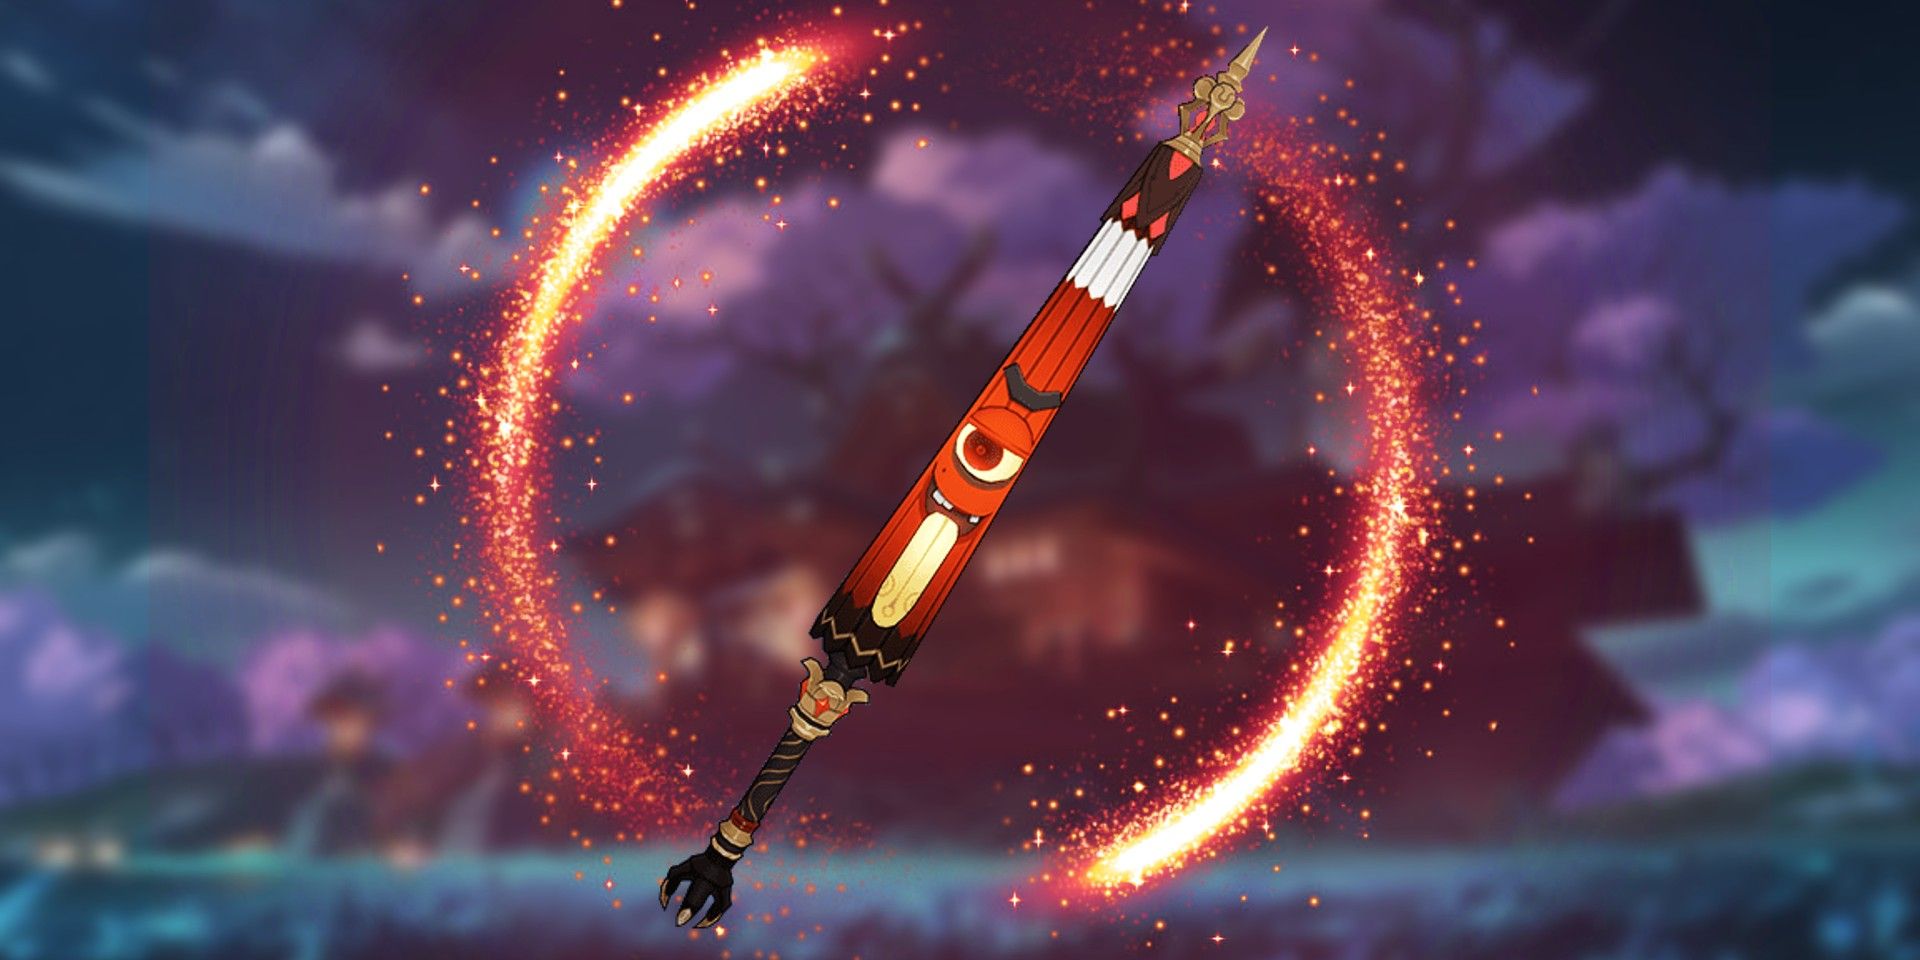 The Toukabou Shigure sword from Genshin Impact is placed in front of a red light visual effect, with a shrine from Inazuma in the background.